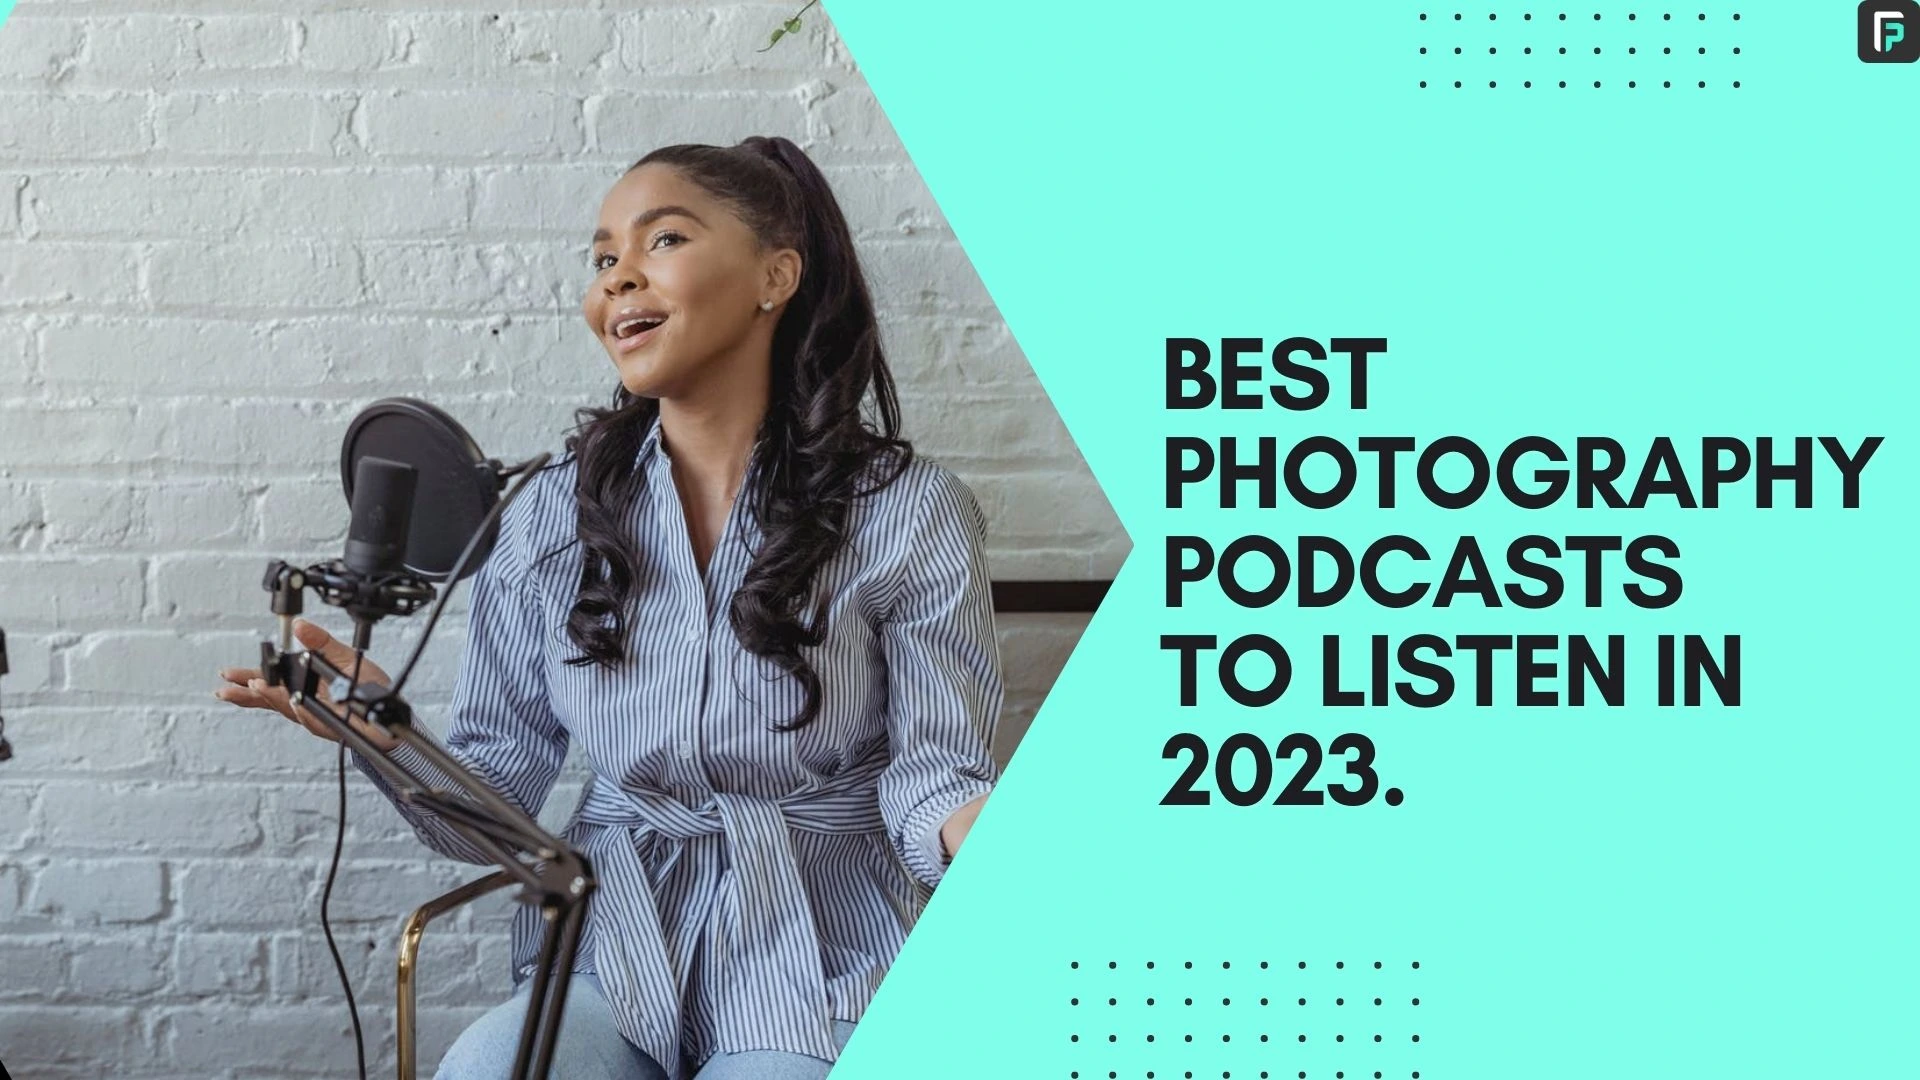 Best Photography Podcast to listen in 2023 Image Banner